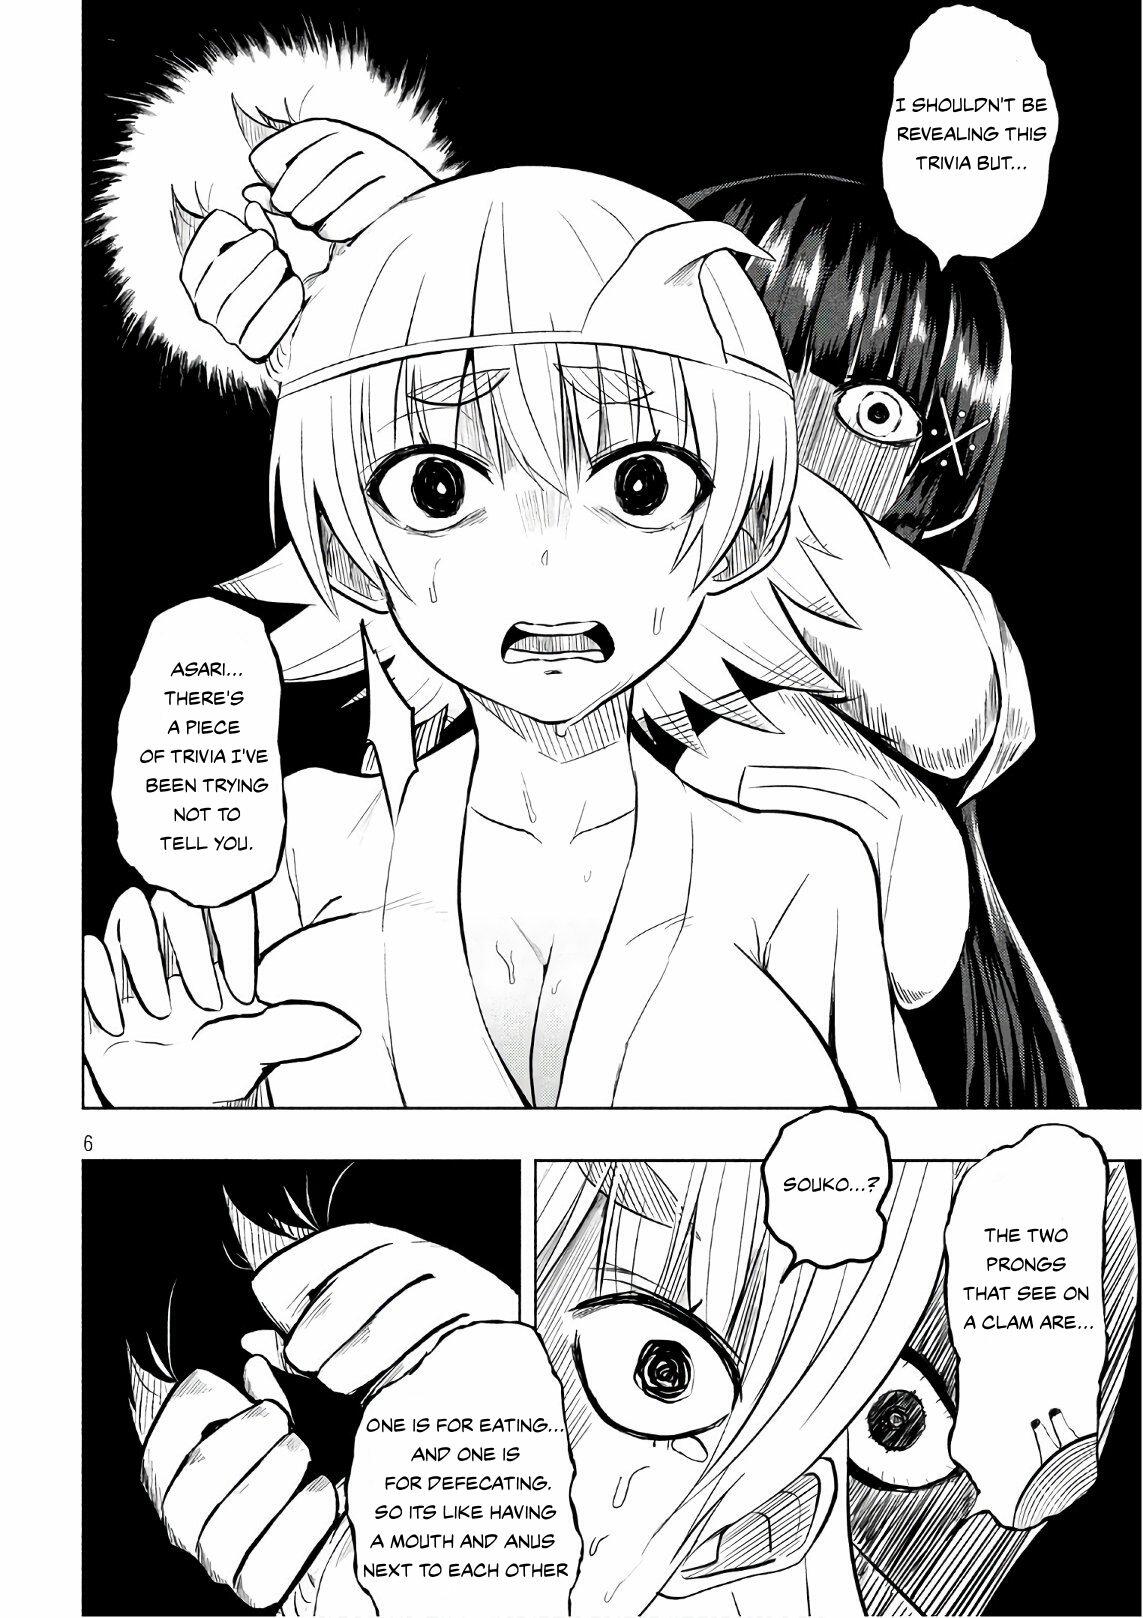 A Girl Who Is Very Well-Informed About Weird Knowledge, Takayukashiki Souko-San Chapter 26: Test Of Courage page 6 - Mangakakalots.com